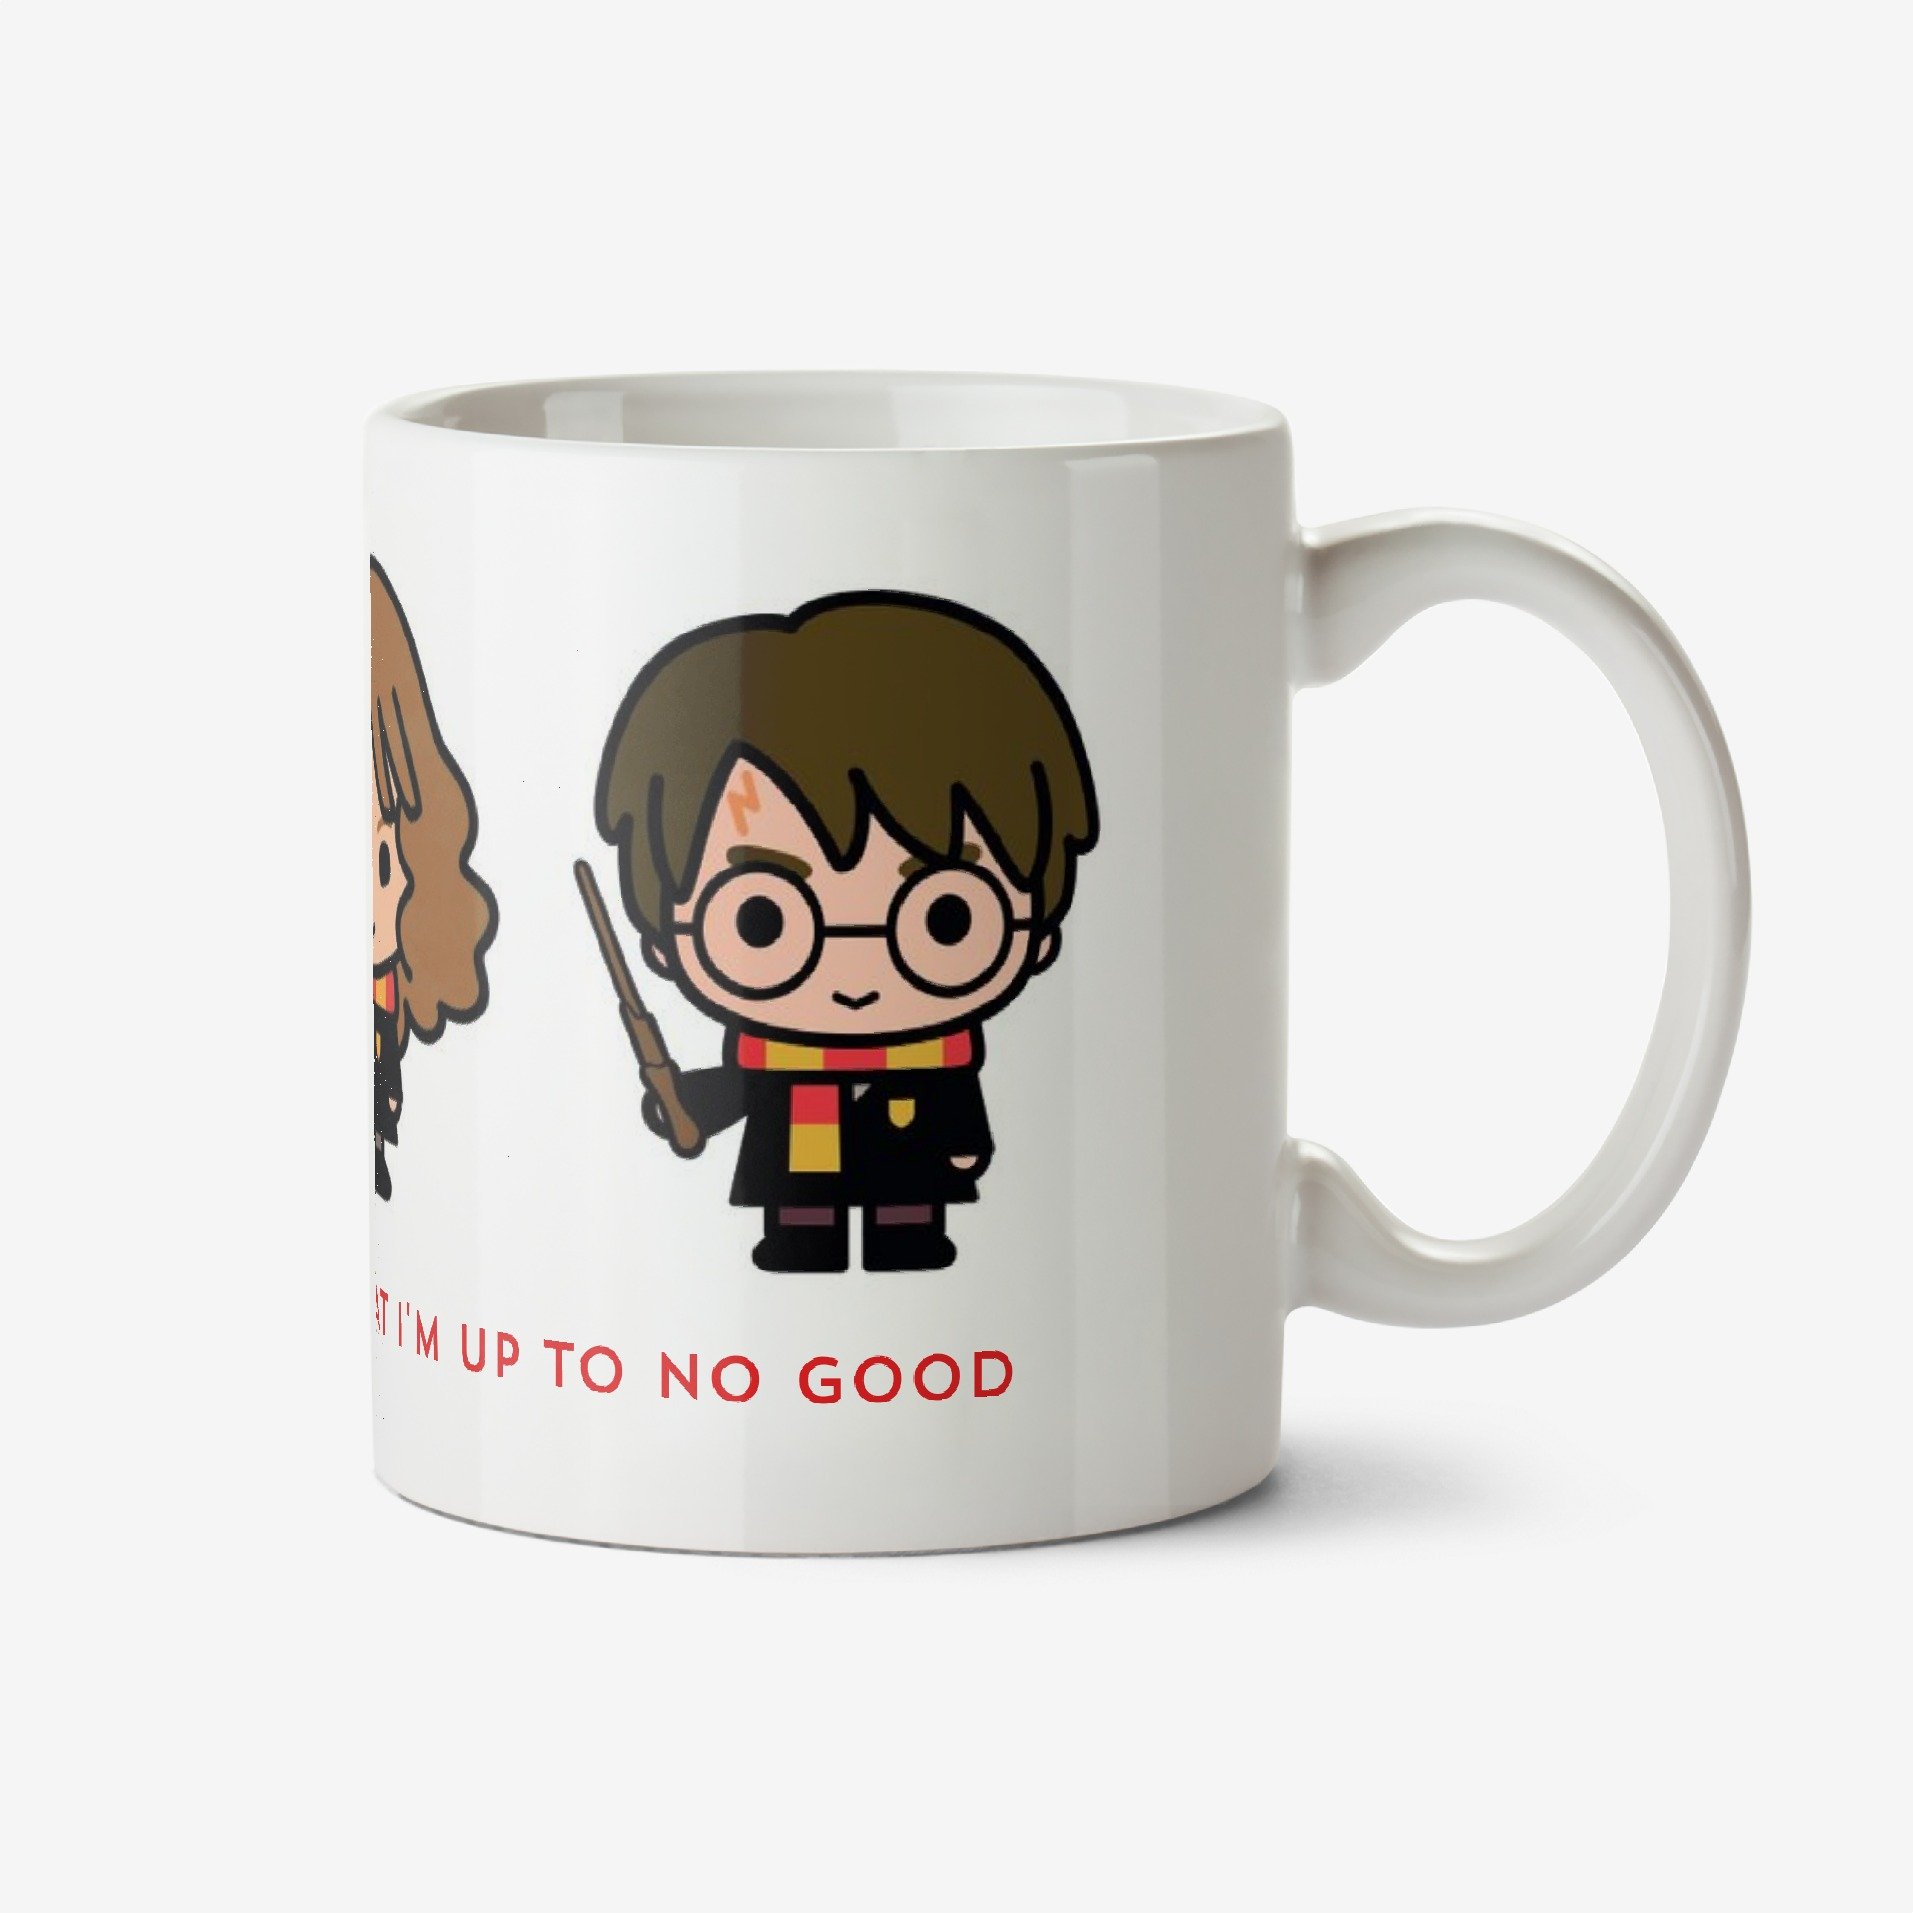 Harry Potter Mug With Ron Weasley And Hermione Granger - I Solemnly Swear That I'm Up To No Good Cer